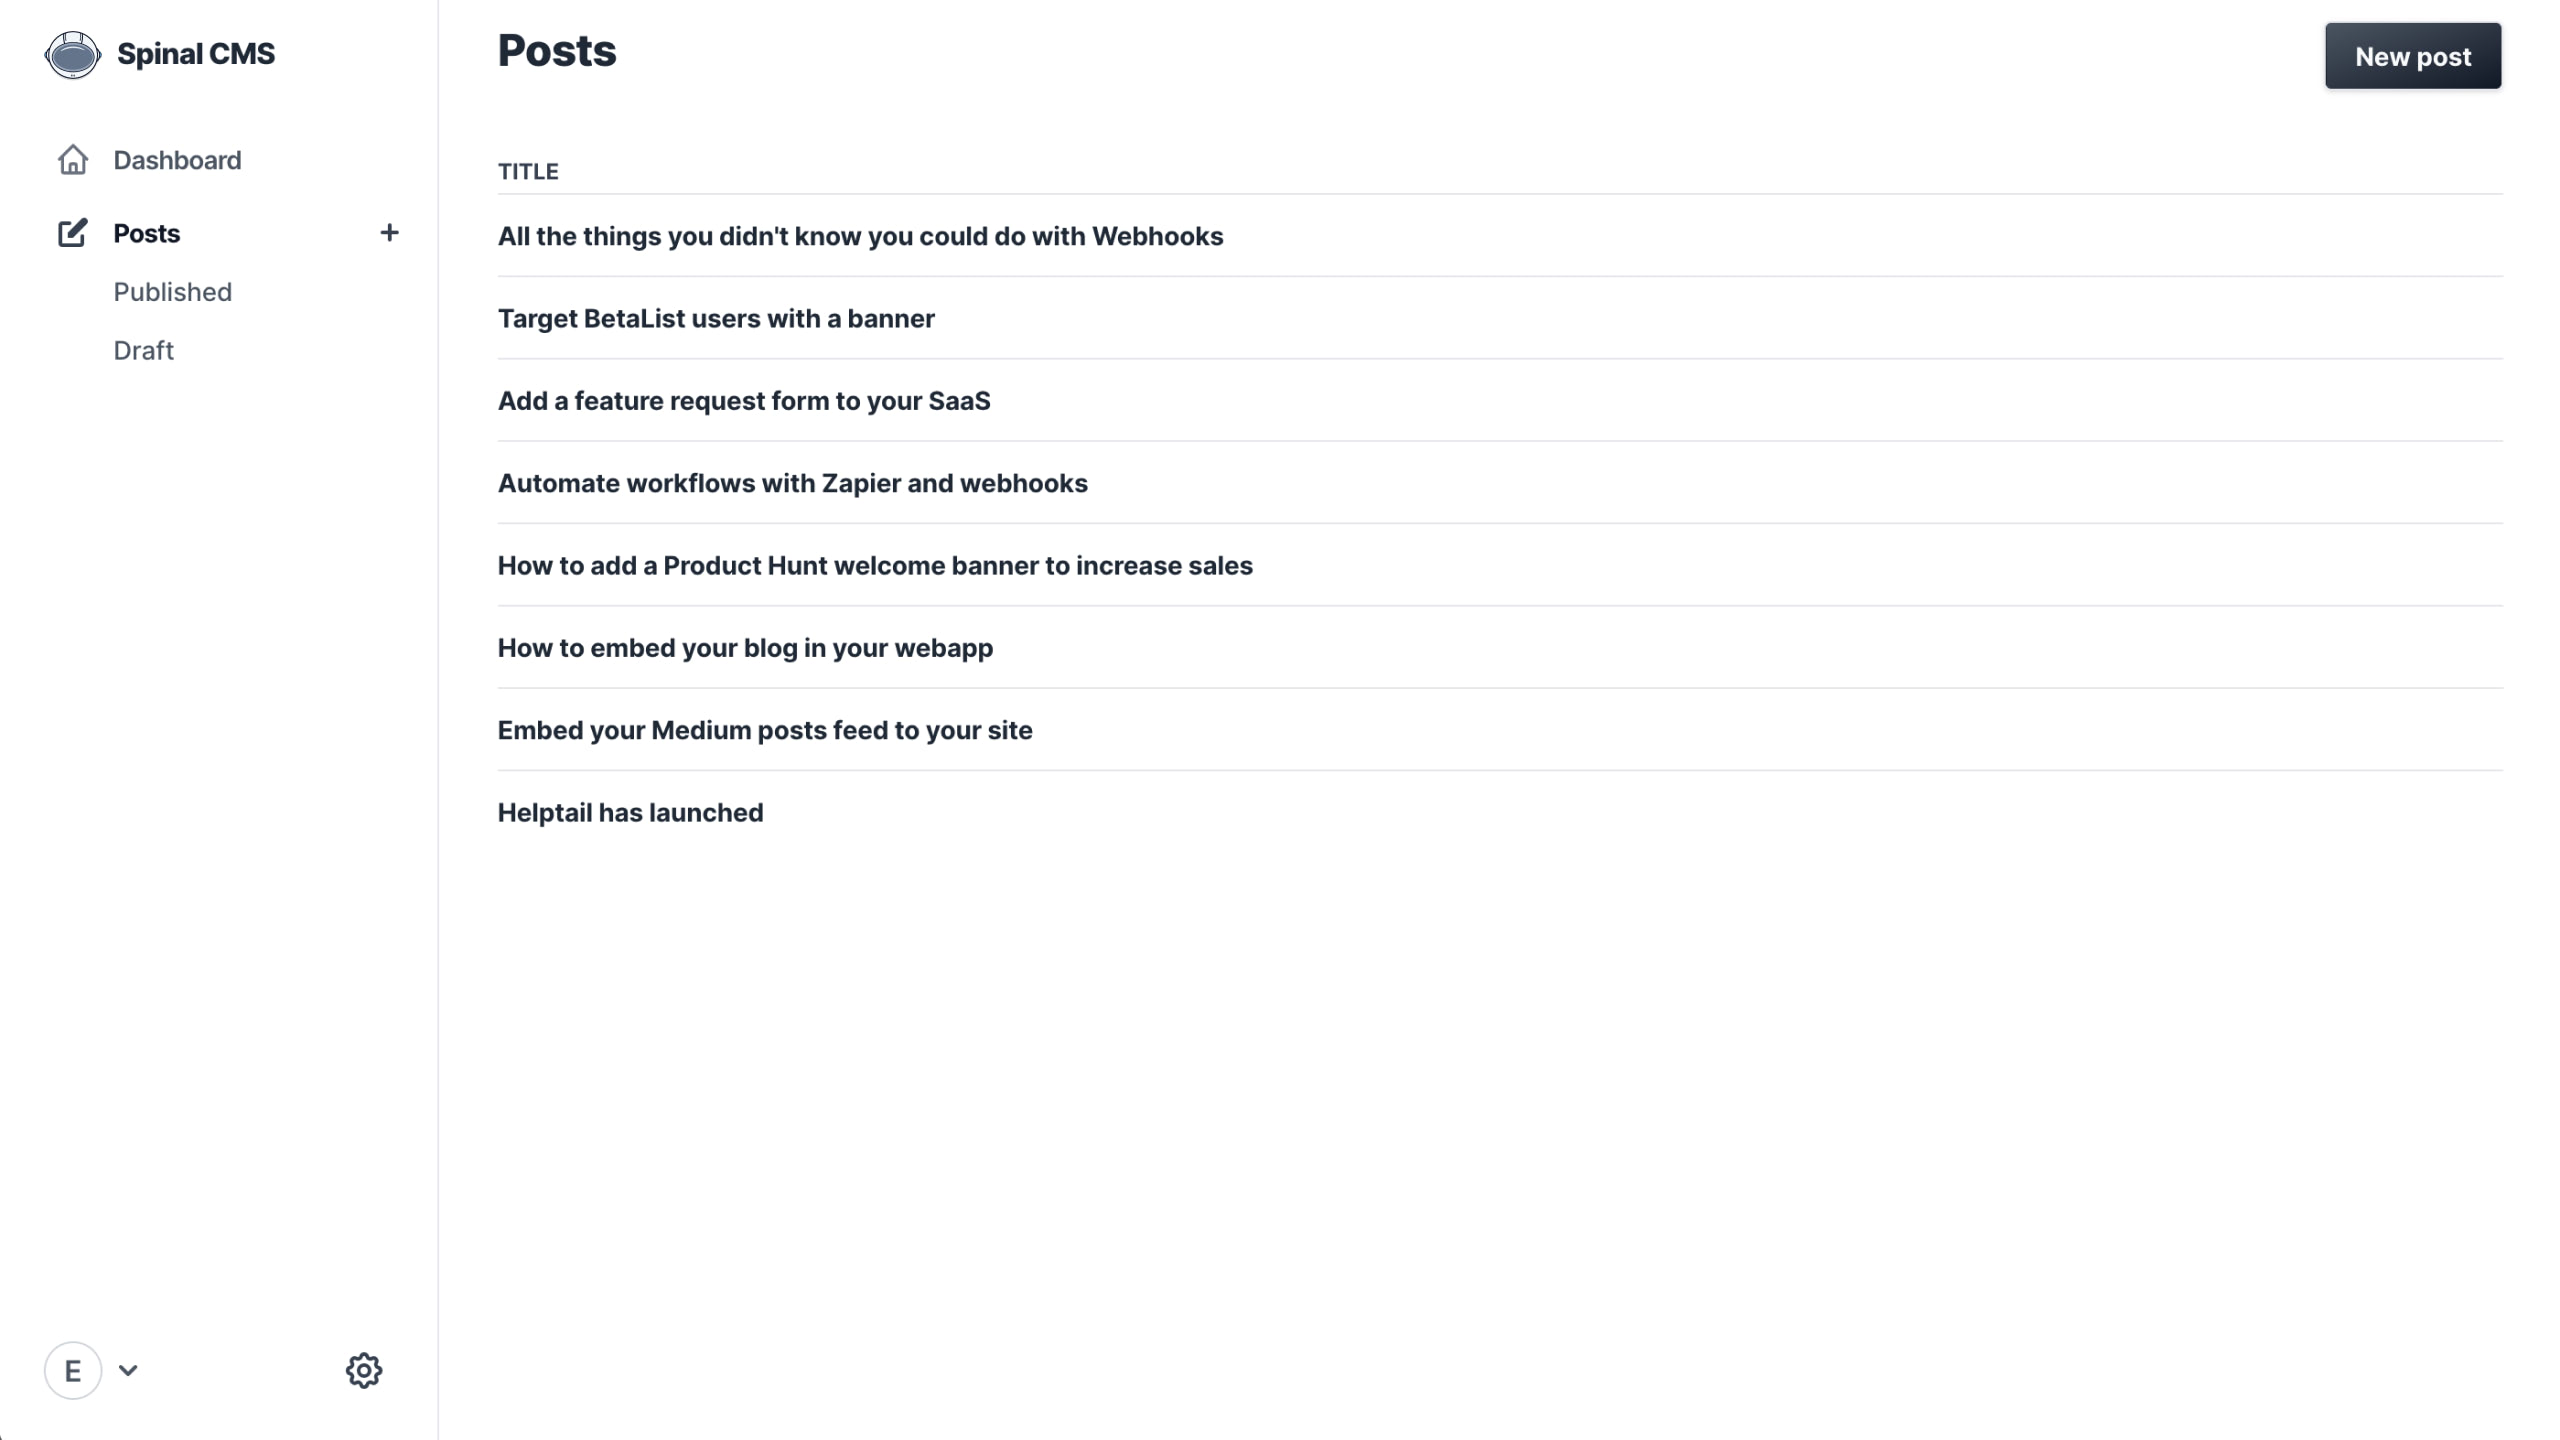 preview of Spinal CMS posts index screen with navigation on the left and the posts lists on the right